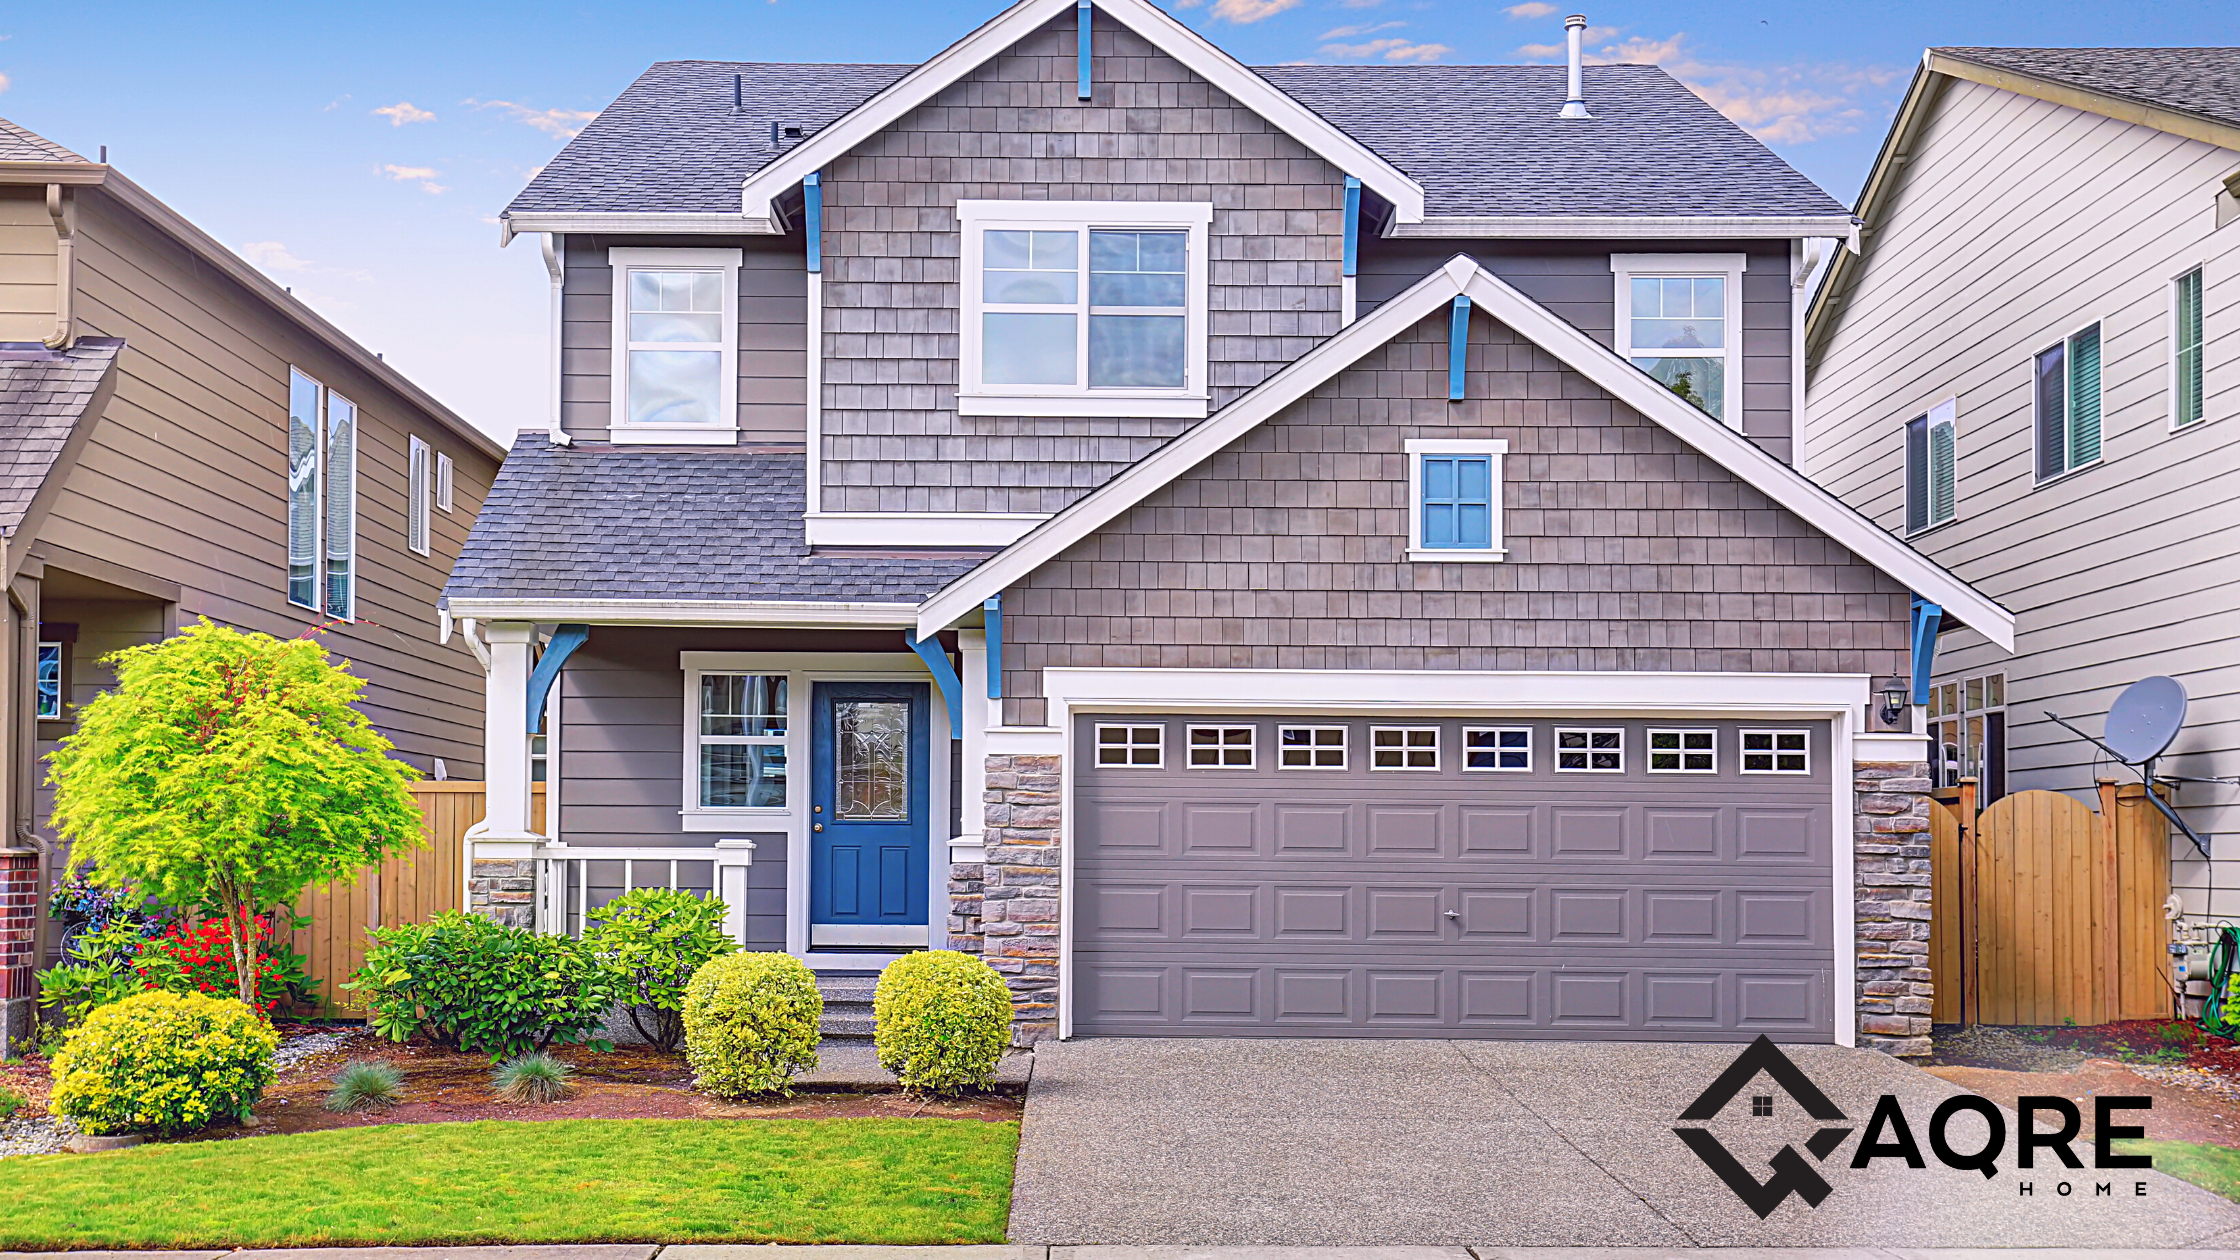 Home Sellers: Curb Appeal 101 – How to Prepare Your Home for Maximum Exposure